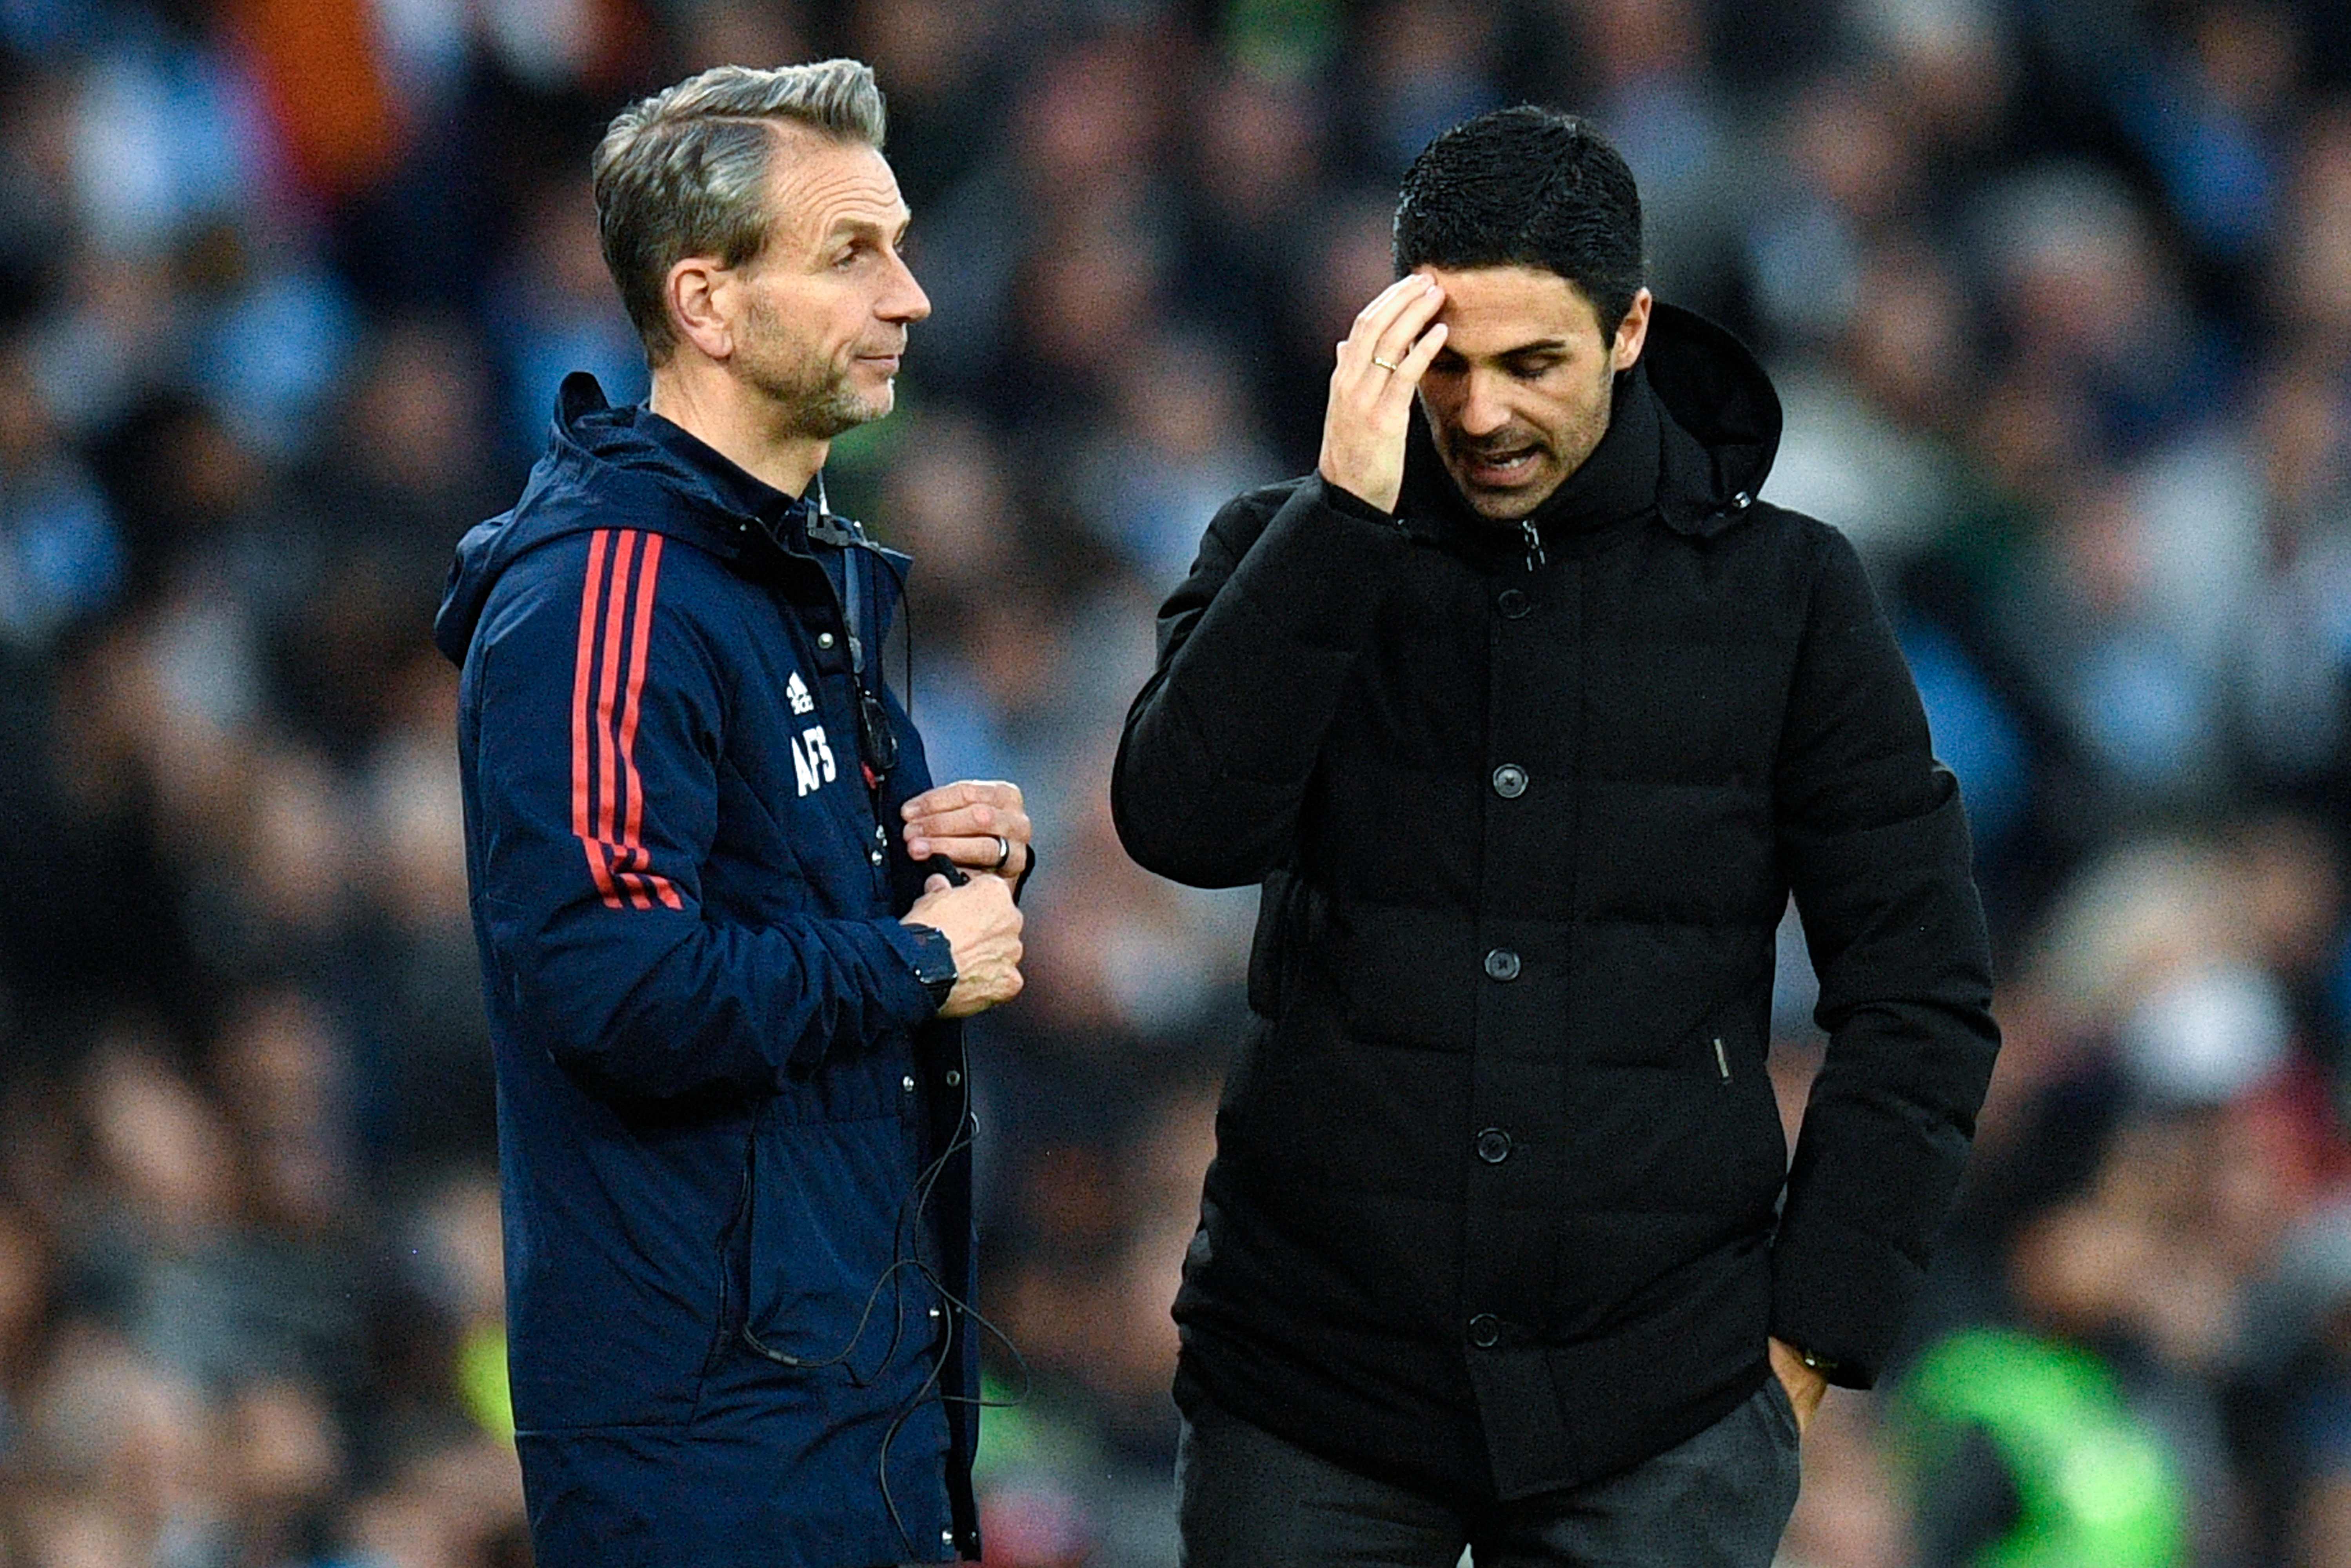 Mikel Arteta looks anguished on the touchline